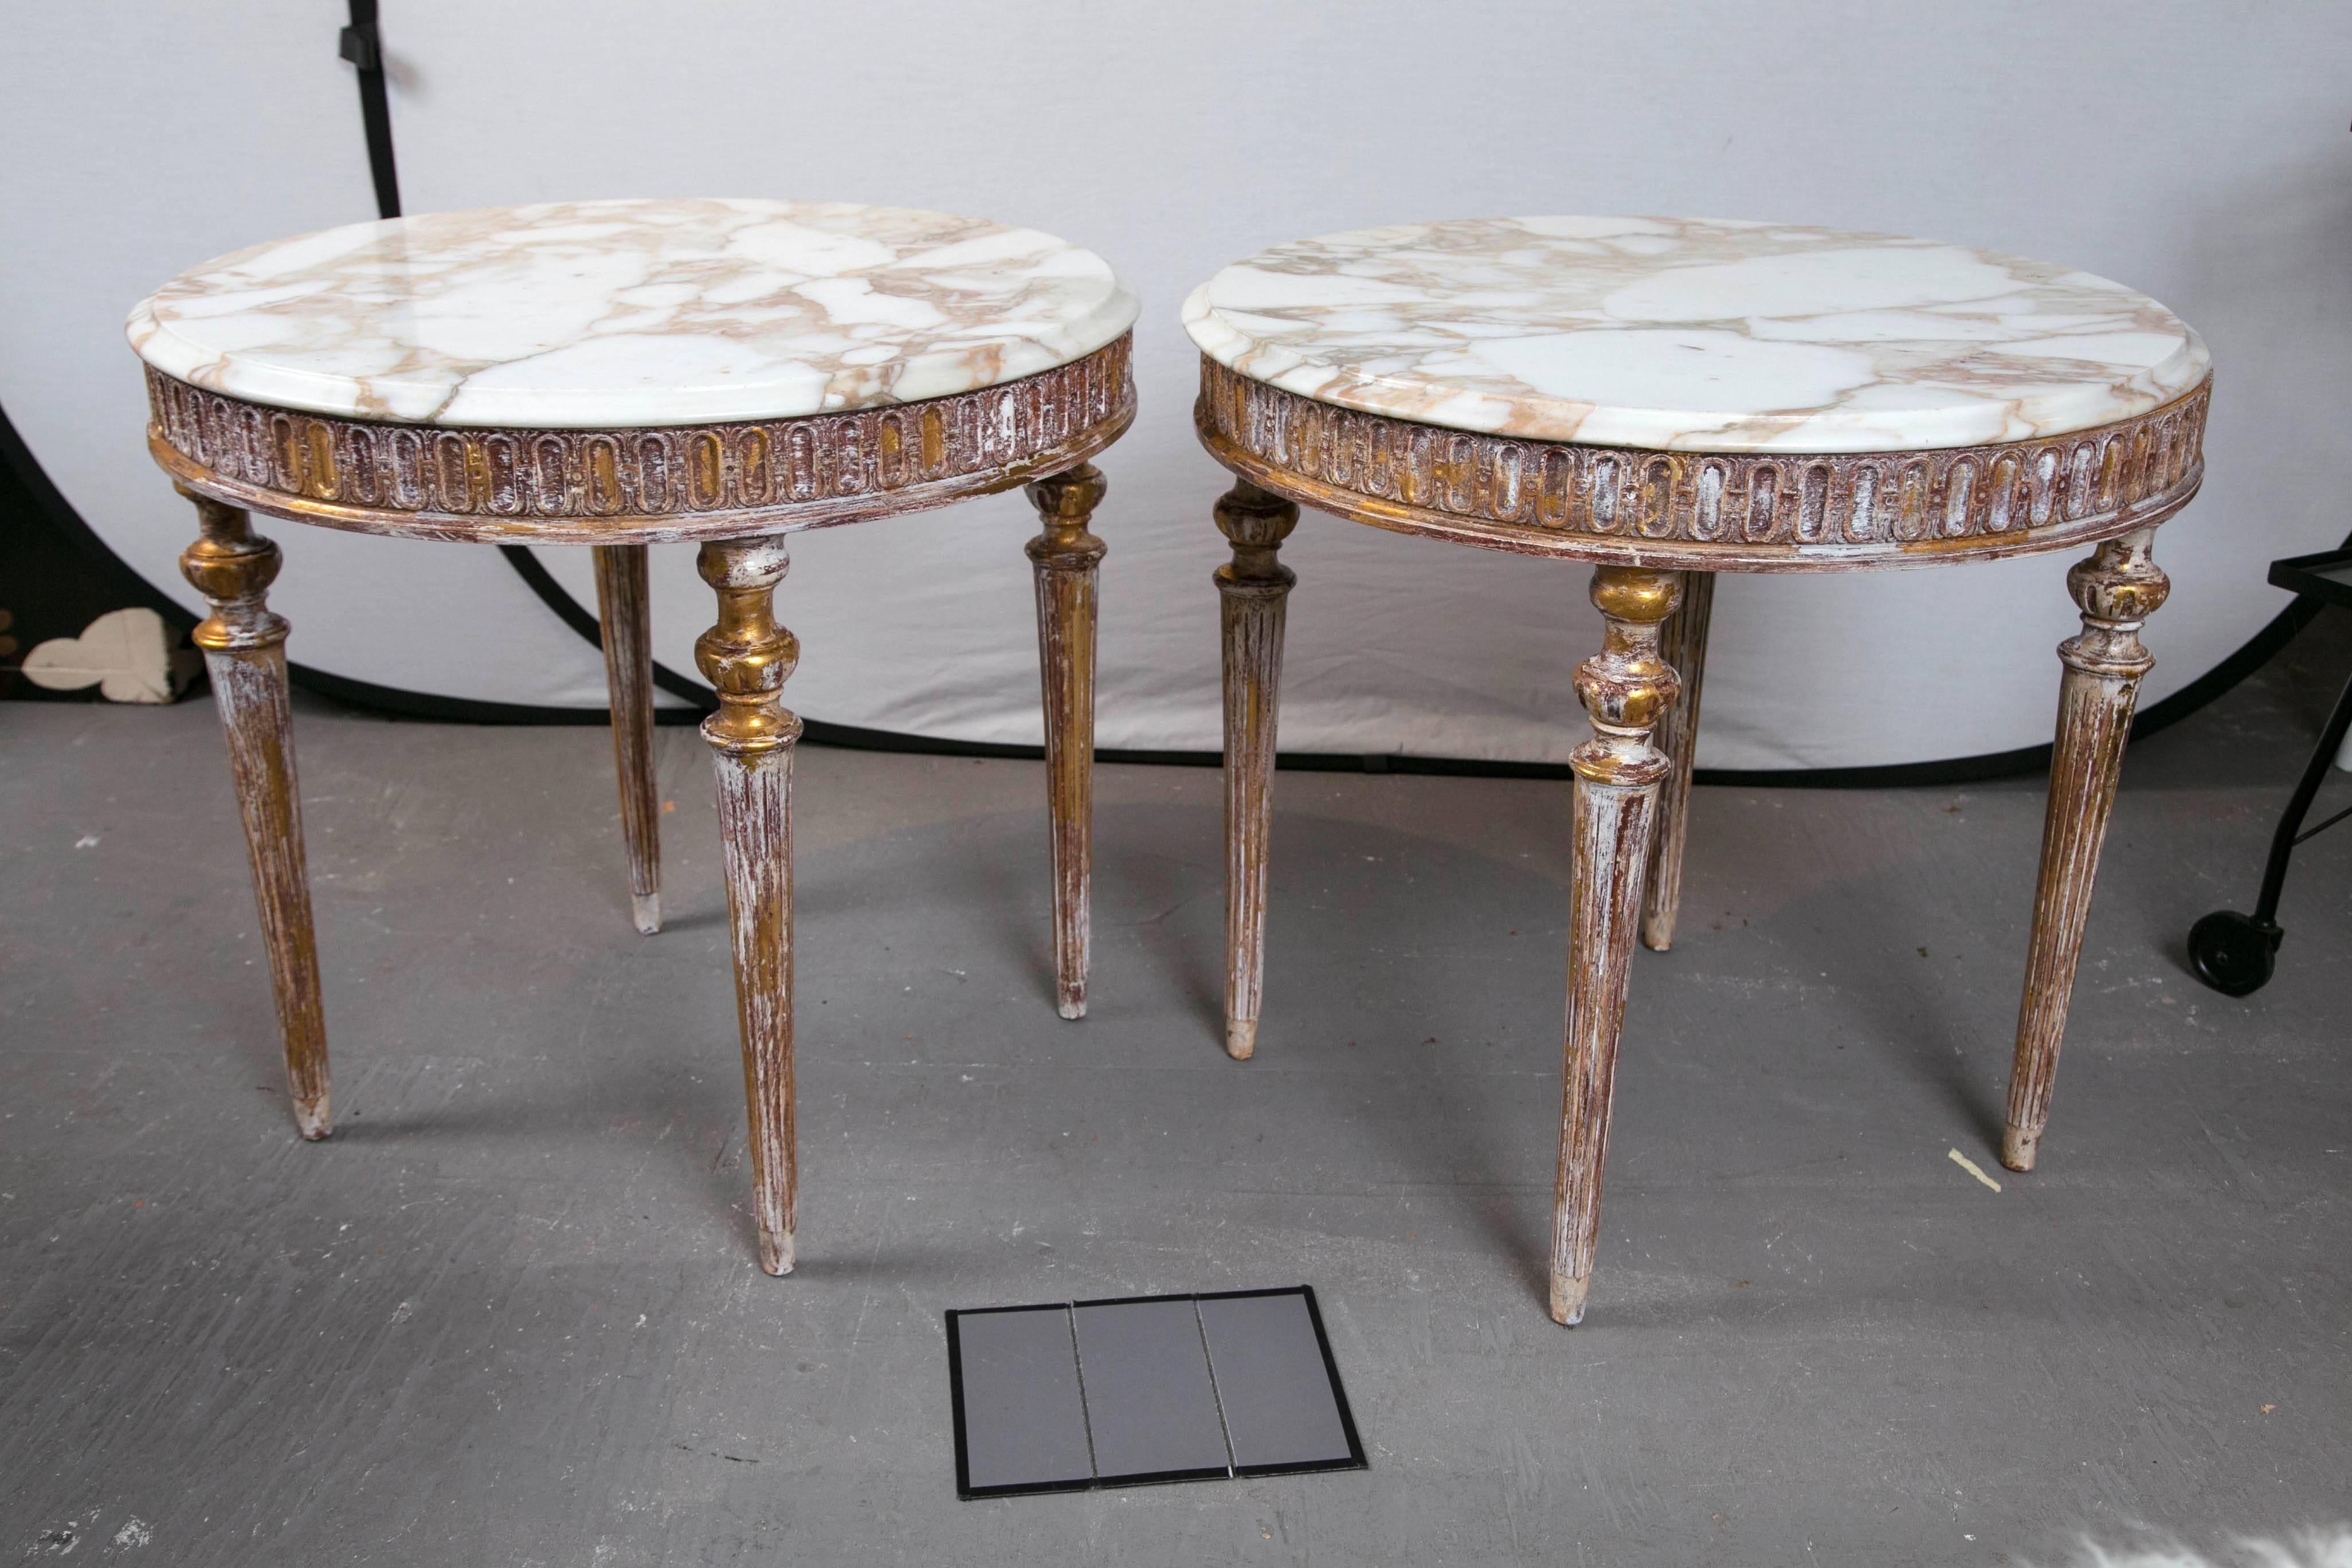 Marble-top carved and gilded Italian end tables. Refinished.